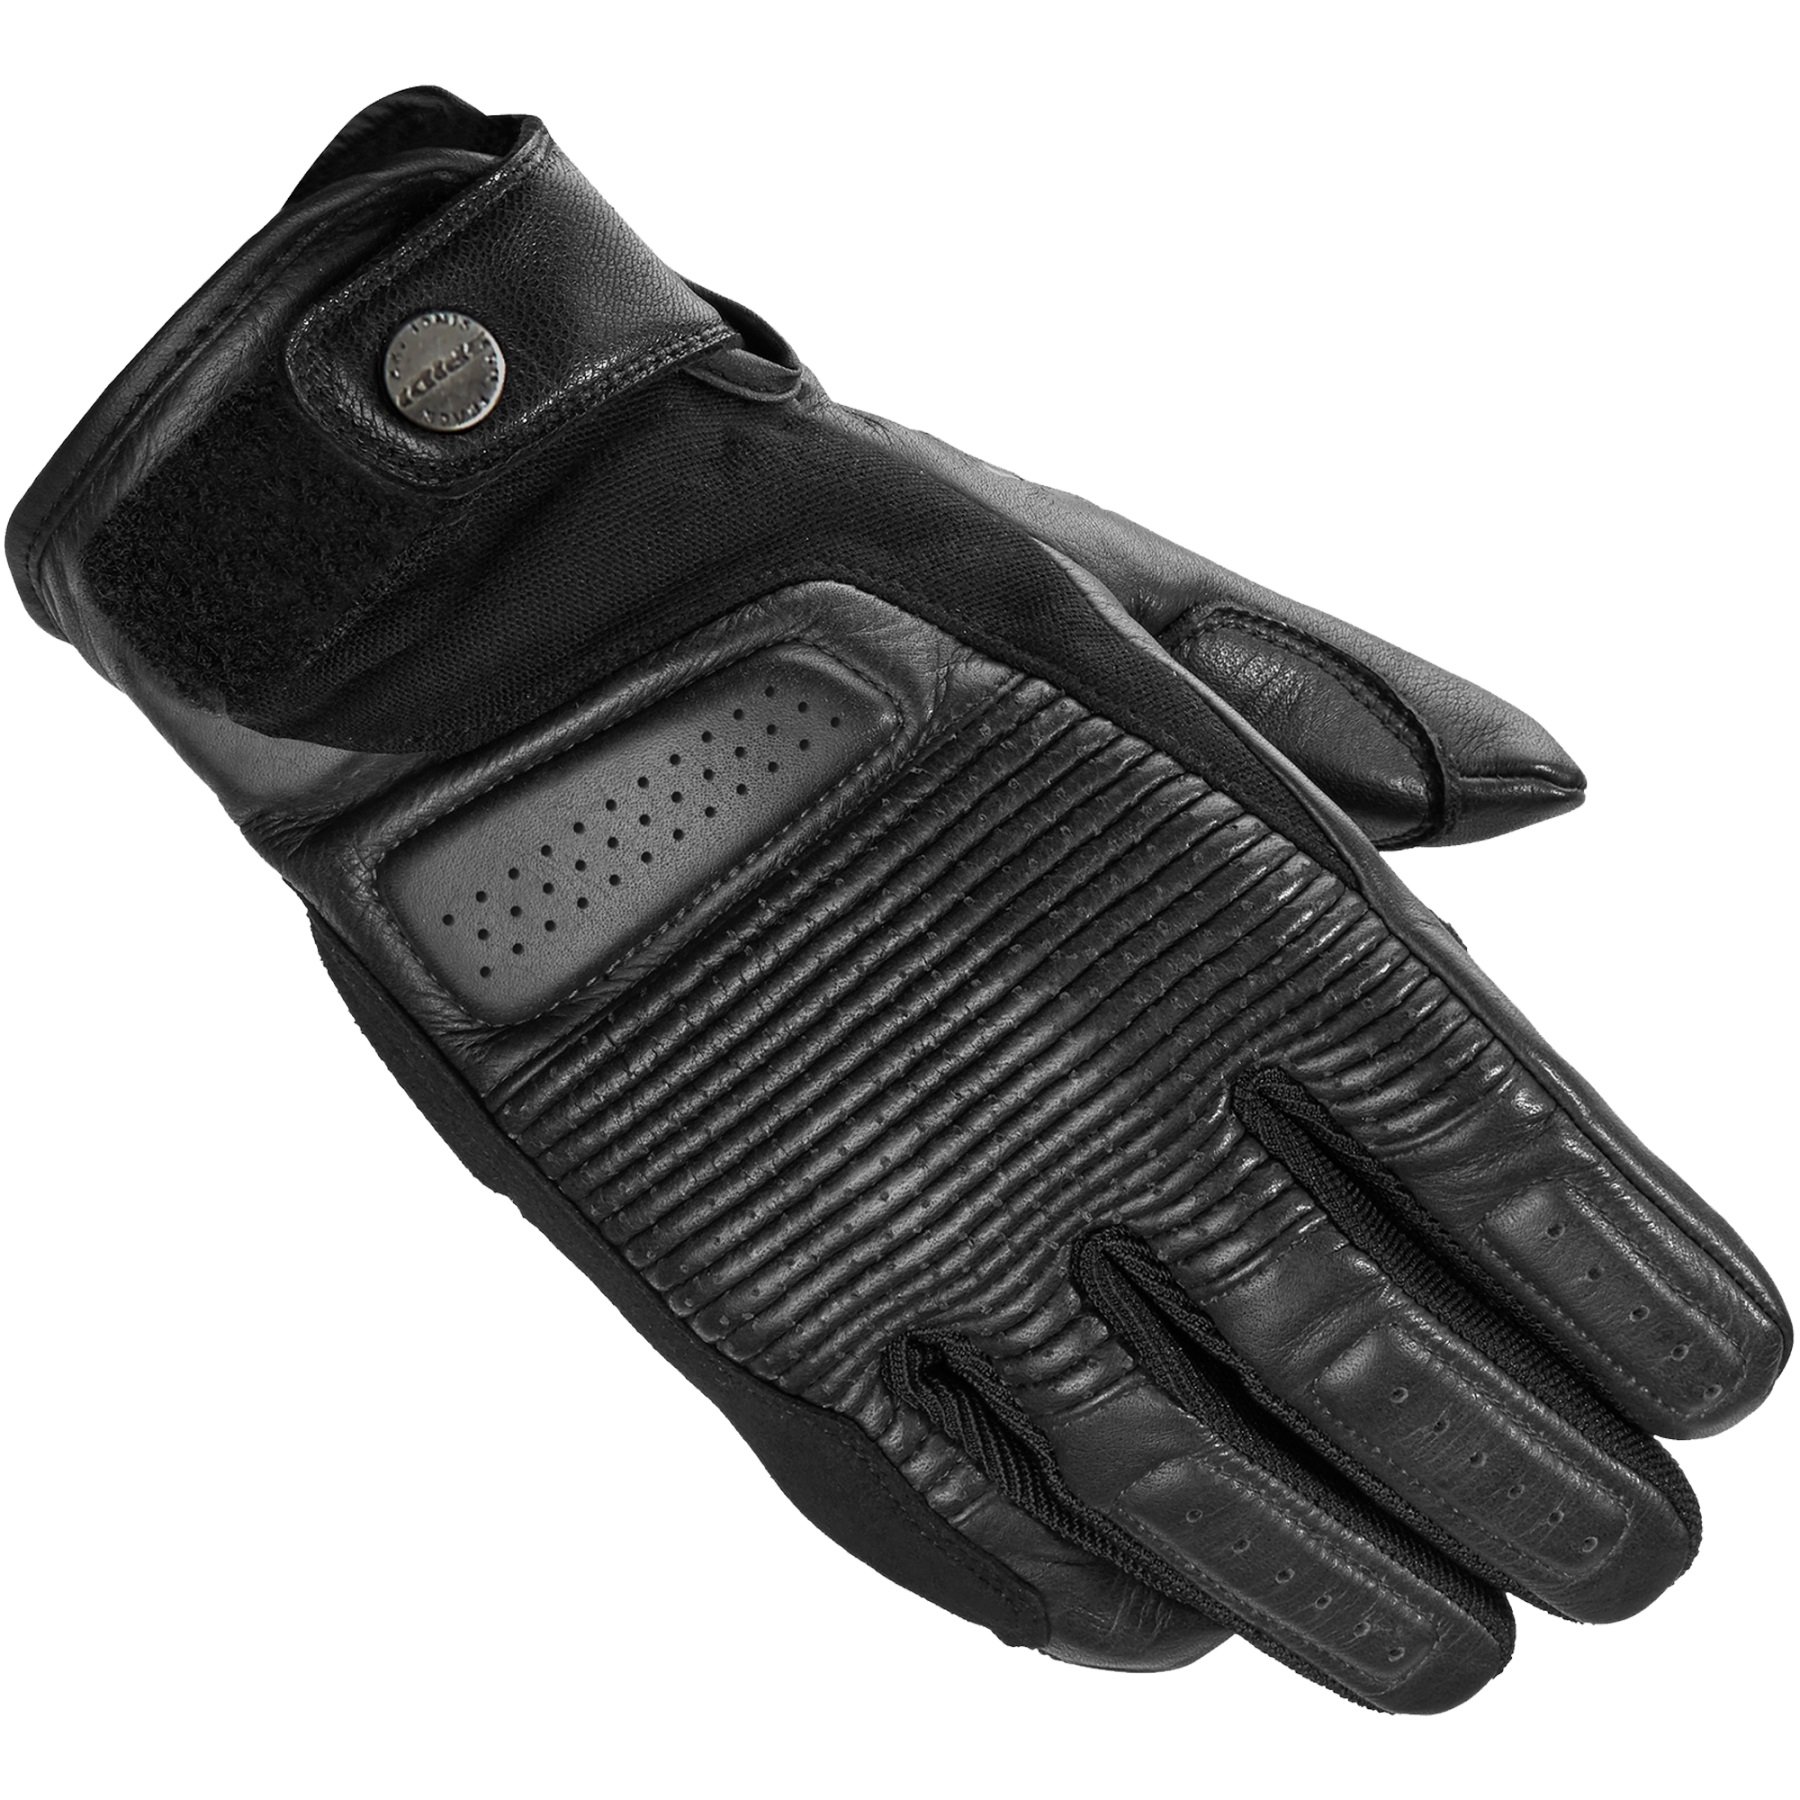 Image of Spidi Clubber Black Motorcycle Gloves Talla M